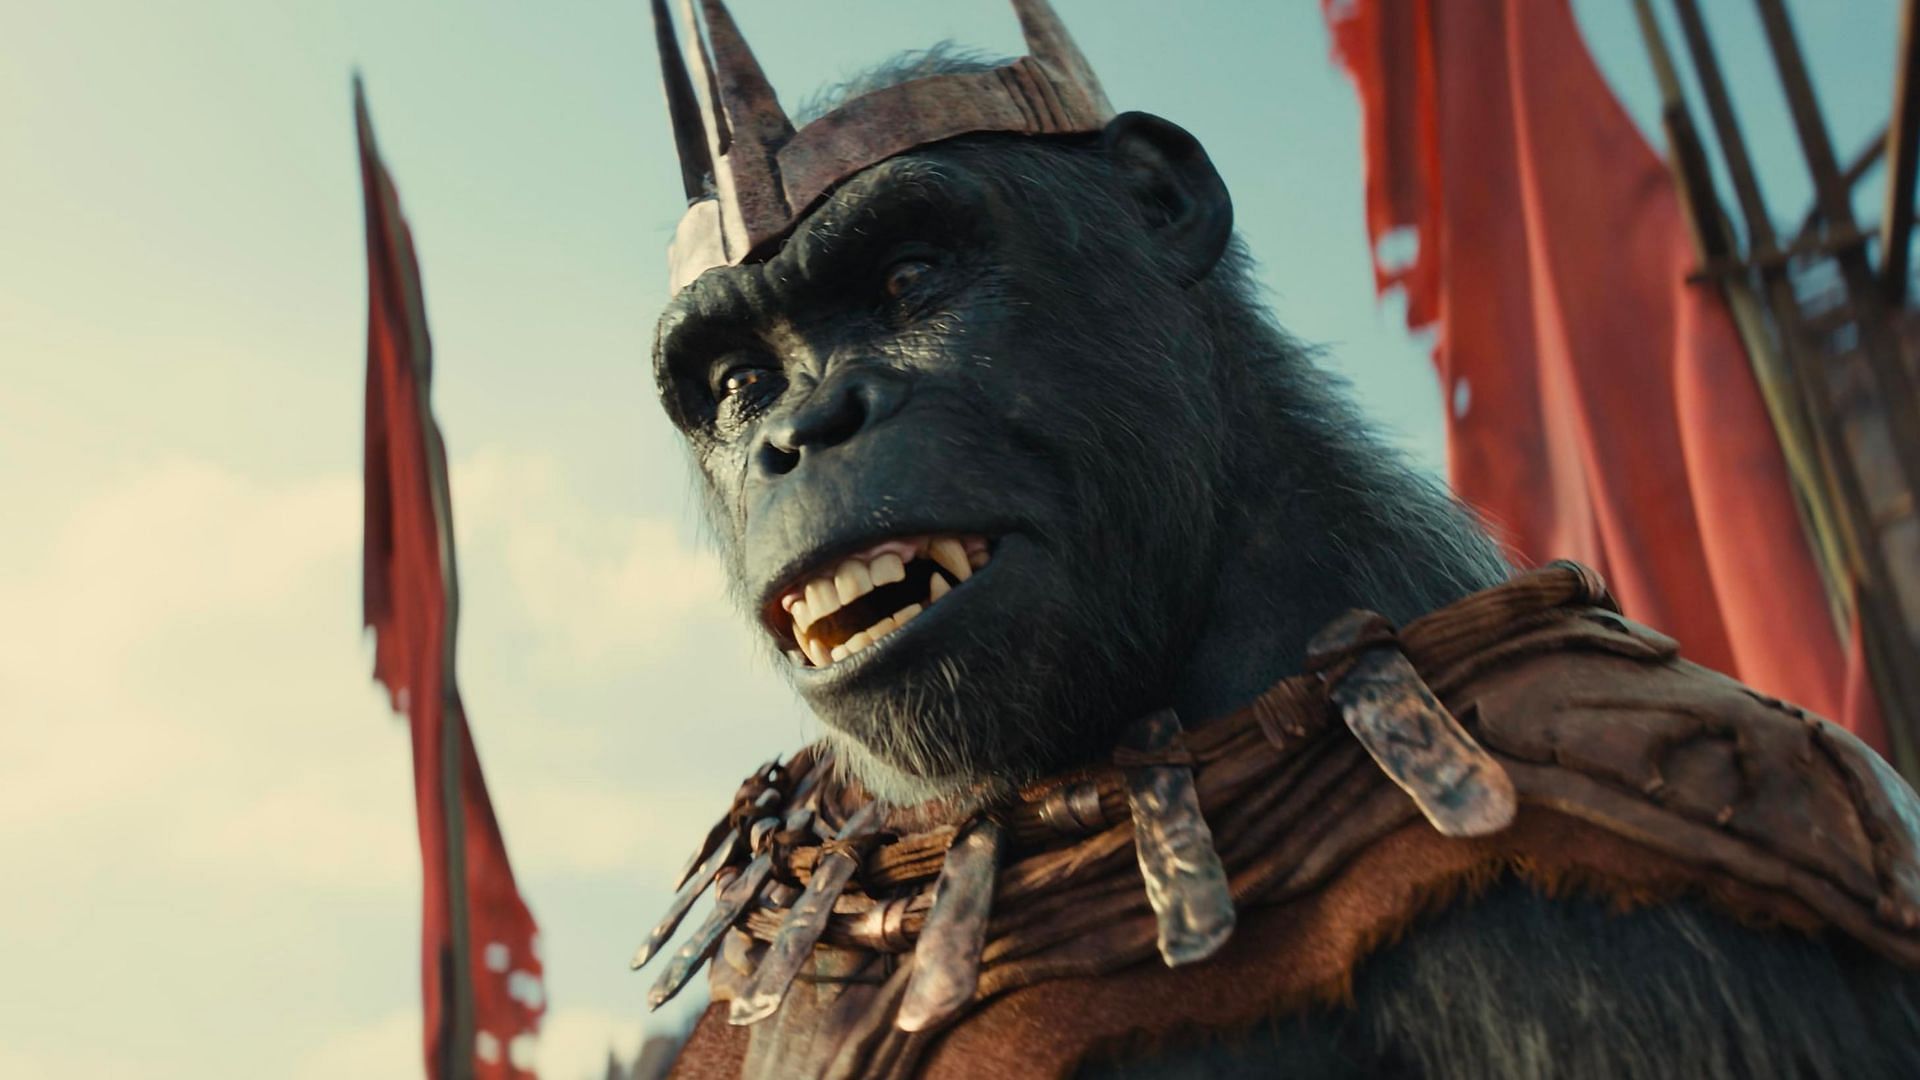 Kingdom of the of the Apes Release date, cast, plot, and